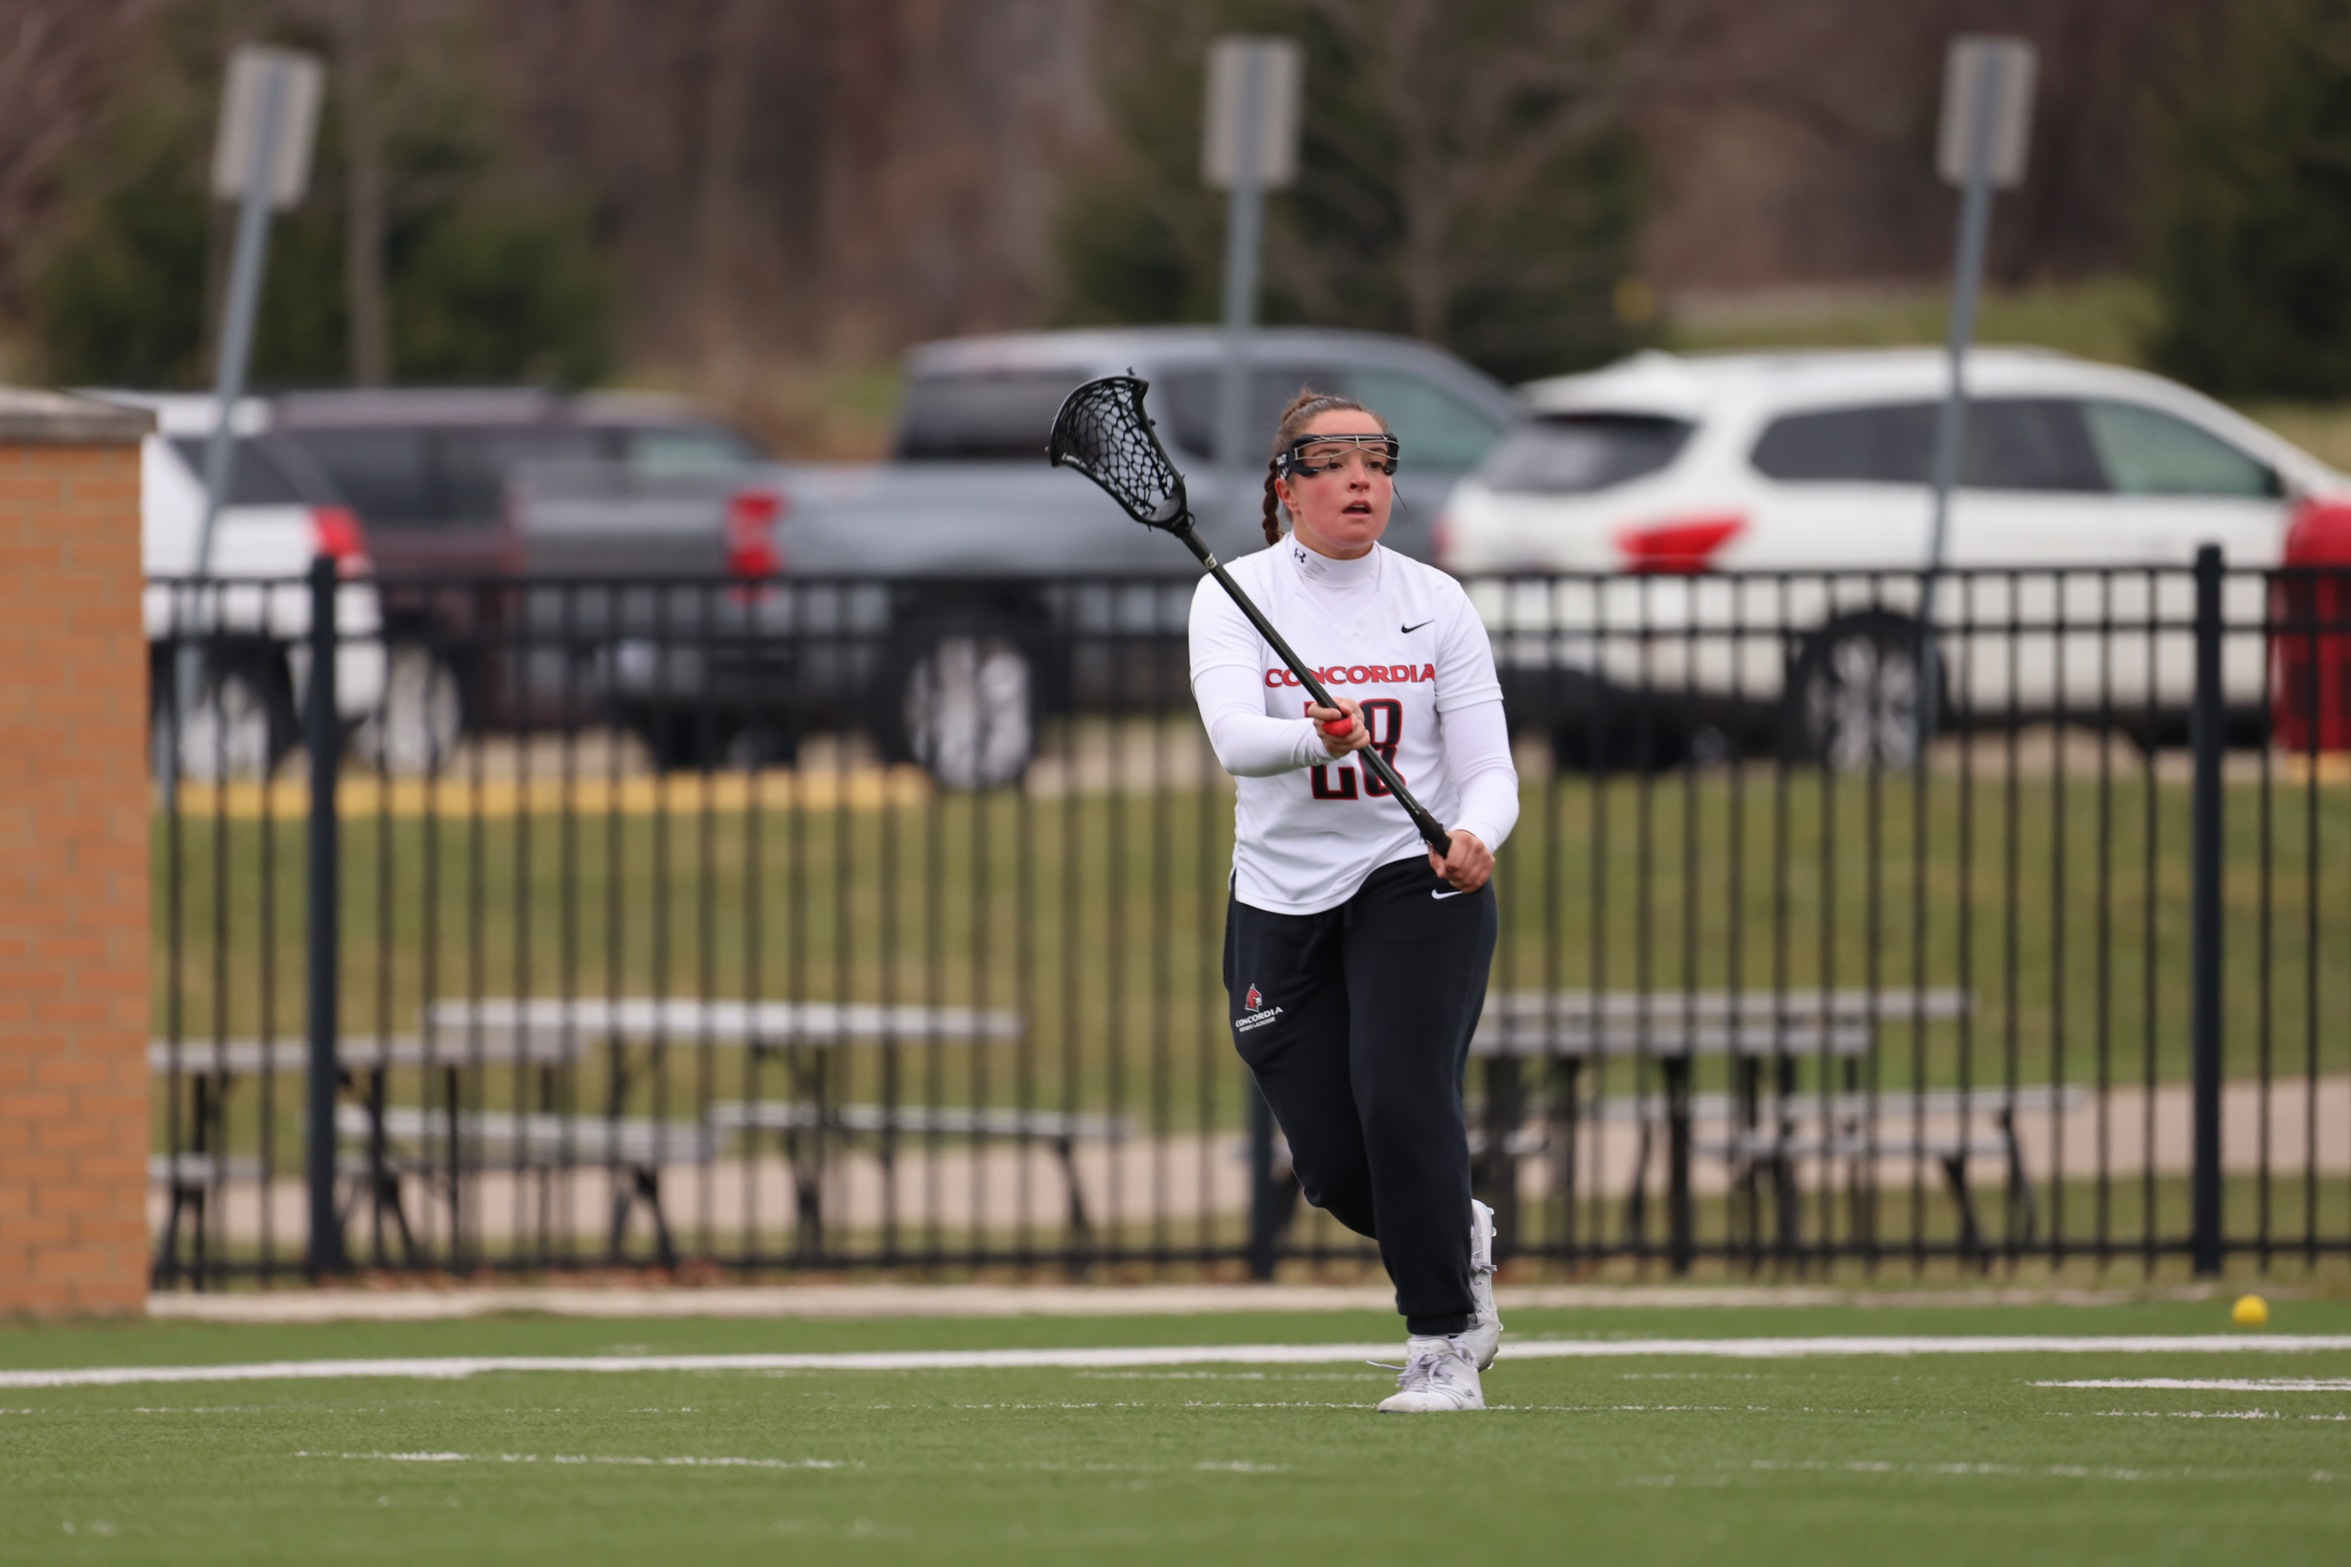 Women's Lacrosse overpowers Rochester Christian 19-1